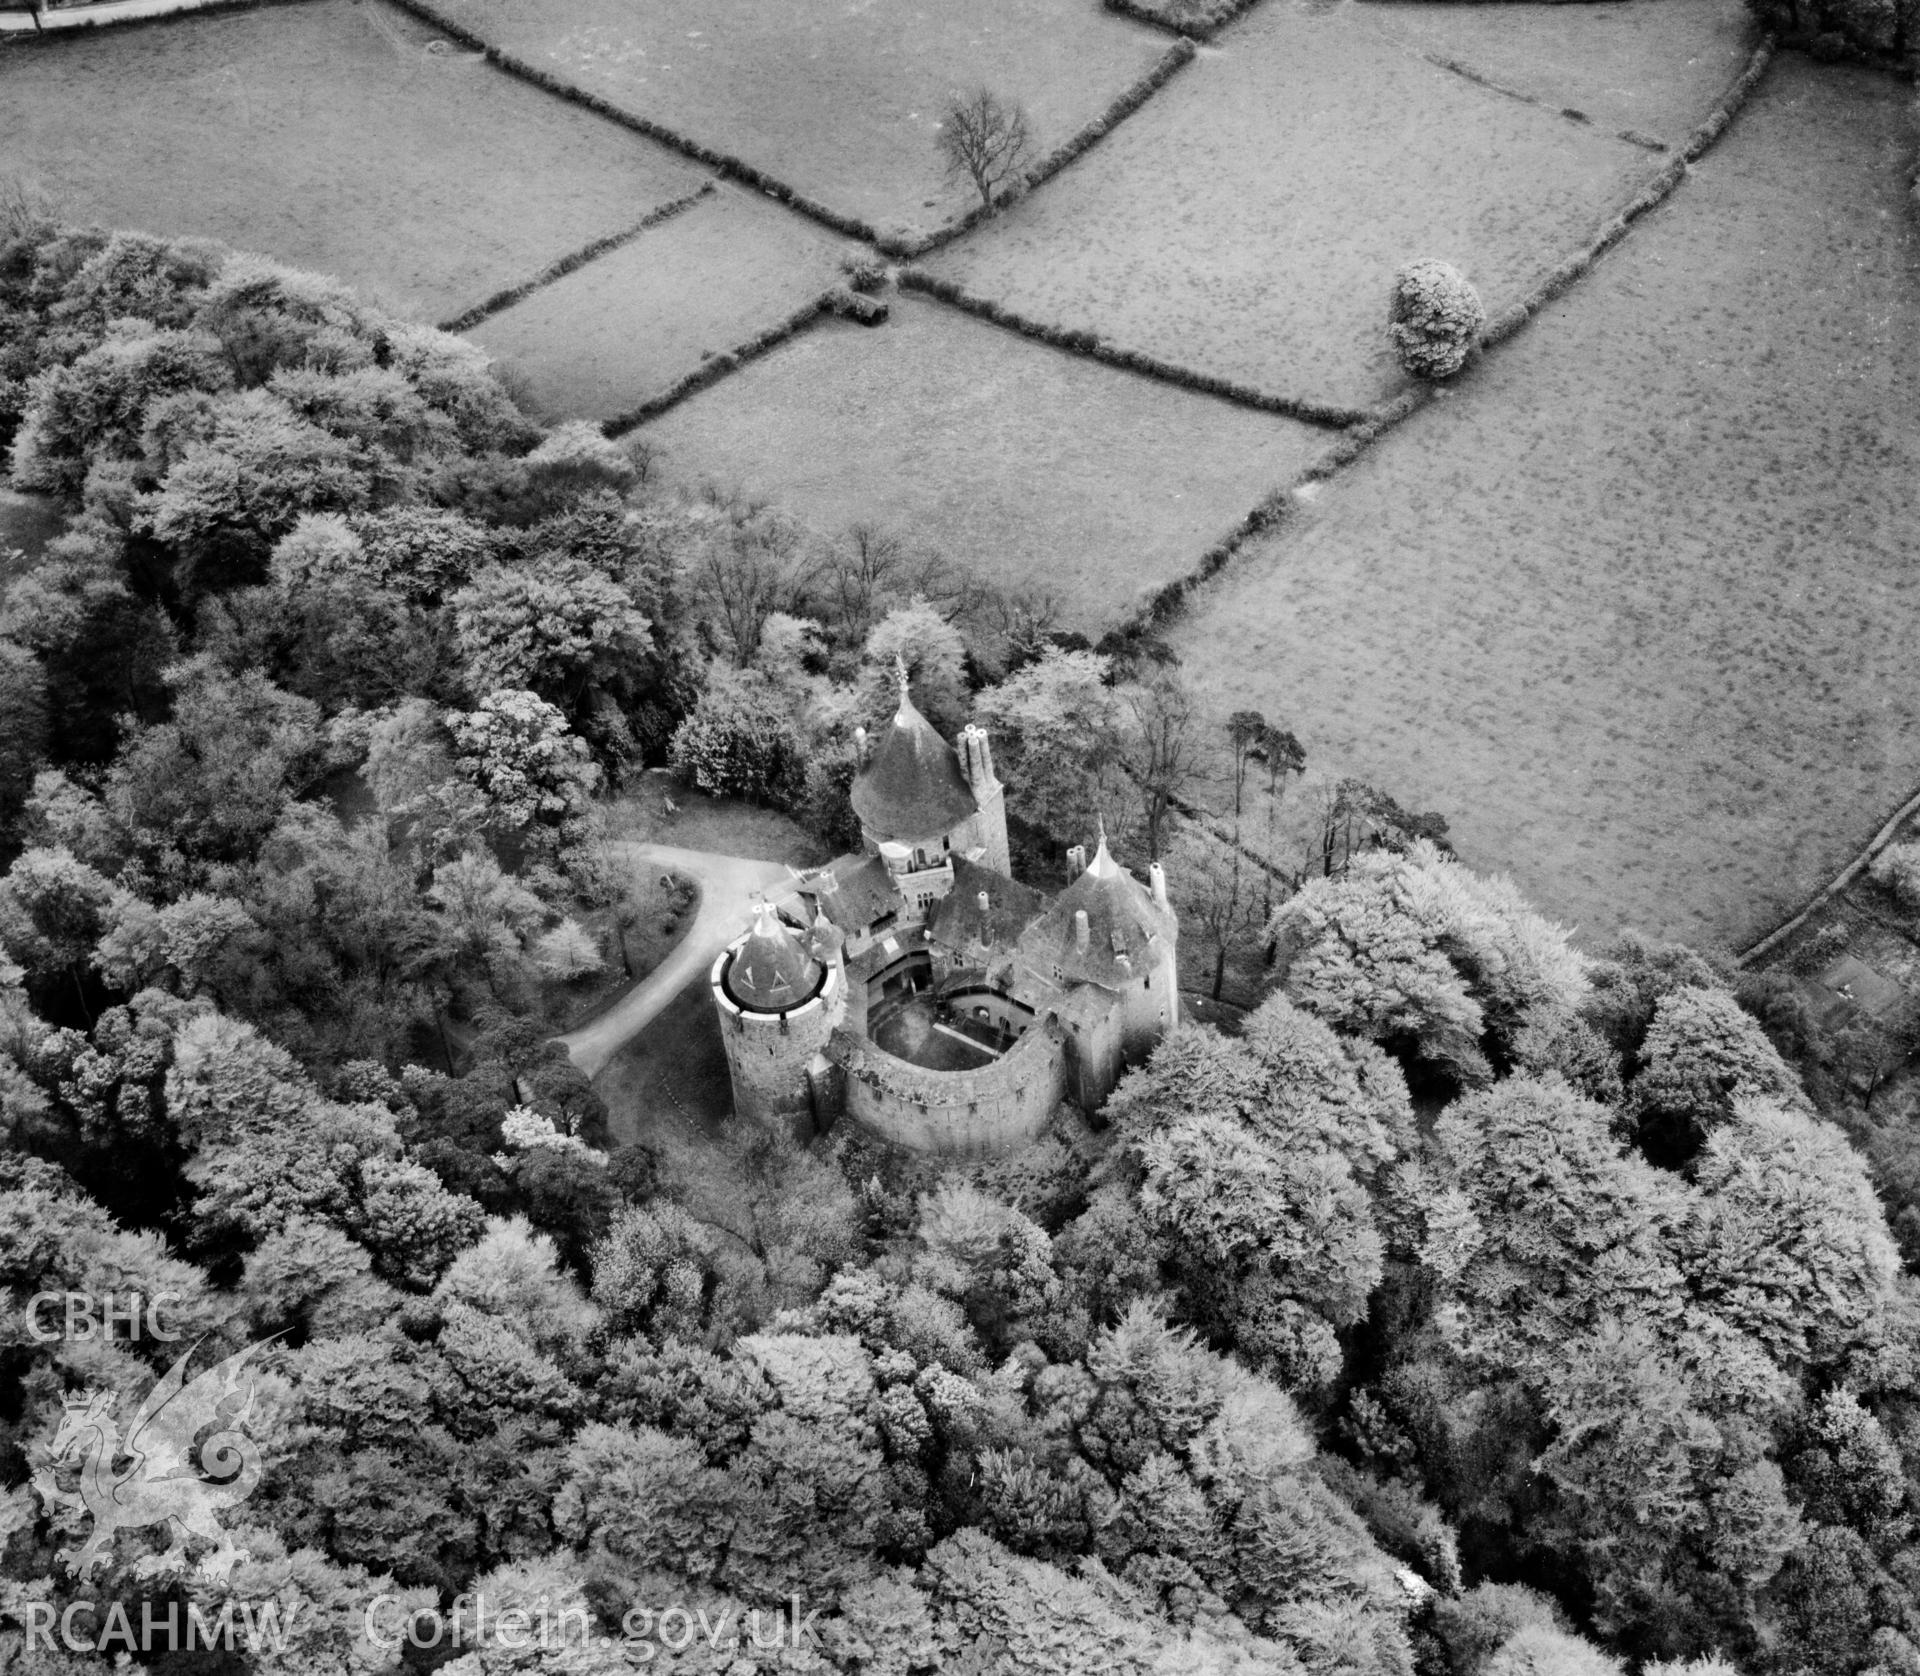 View of Castell Coch, Tongwynlais